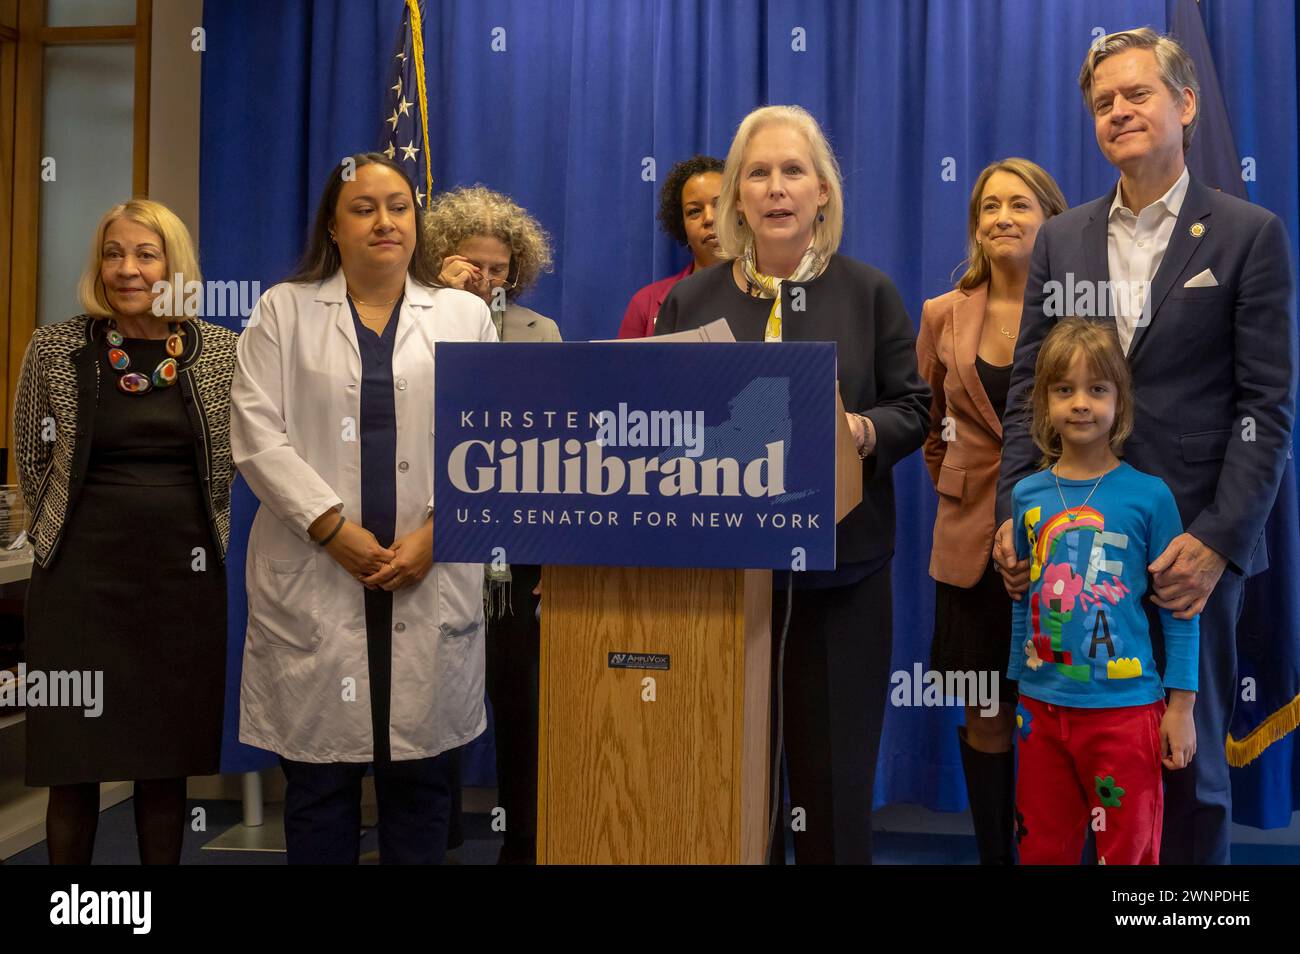 New York, United States. 03rd Mar, 2024. NEW YORK, NEW YORK - MARCH 3: U.S. Senator Kirsten Gillibrand speaks at a press conference calling for the passage of the Access to Family Building on March 3, 2024 in New York City. Senator Gillibrand, standing with other advocates, calls for the passage of the Access to Family Building Act, legislation that would protect access to in vitro fertilization (IVF) and other assisted reproductive technology (ART) following the Alabama Supreme Court decision that puts reproductive rights in jeopardy. Credit: Ron Adar/Alamy Live News Stock Photo